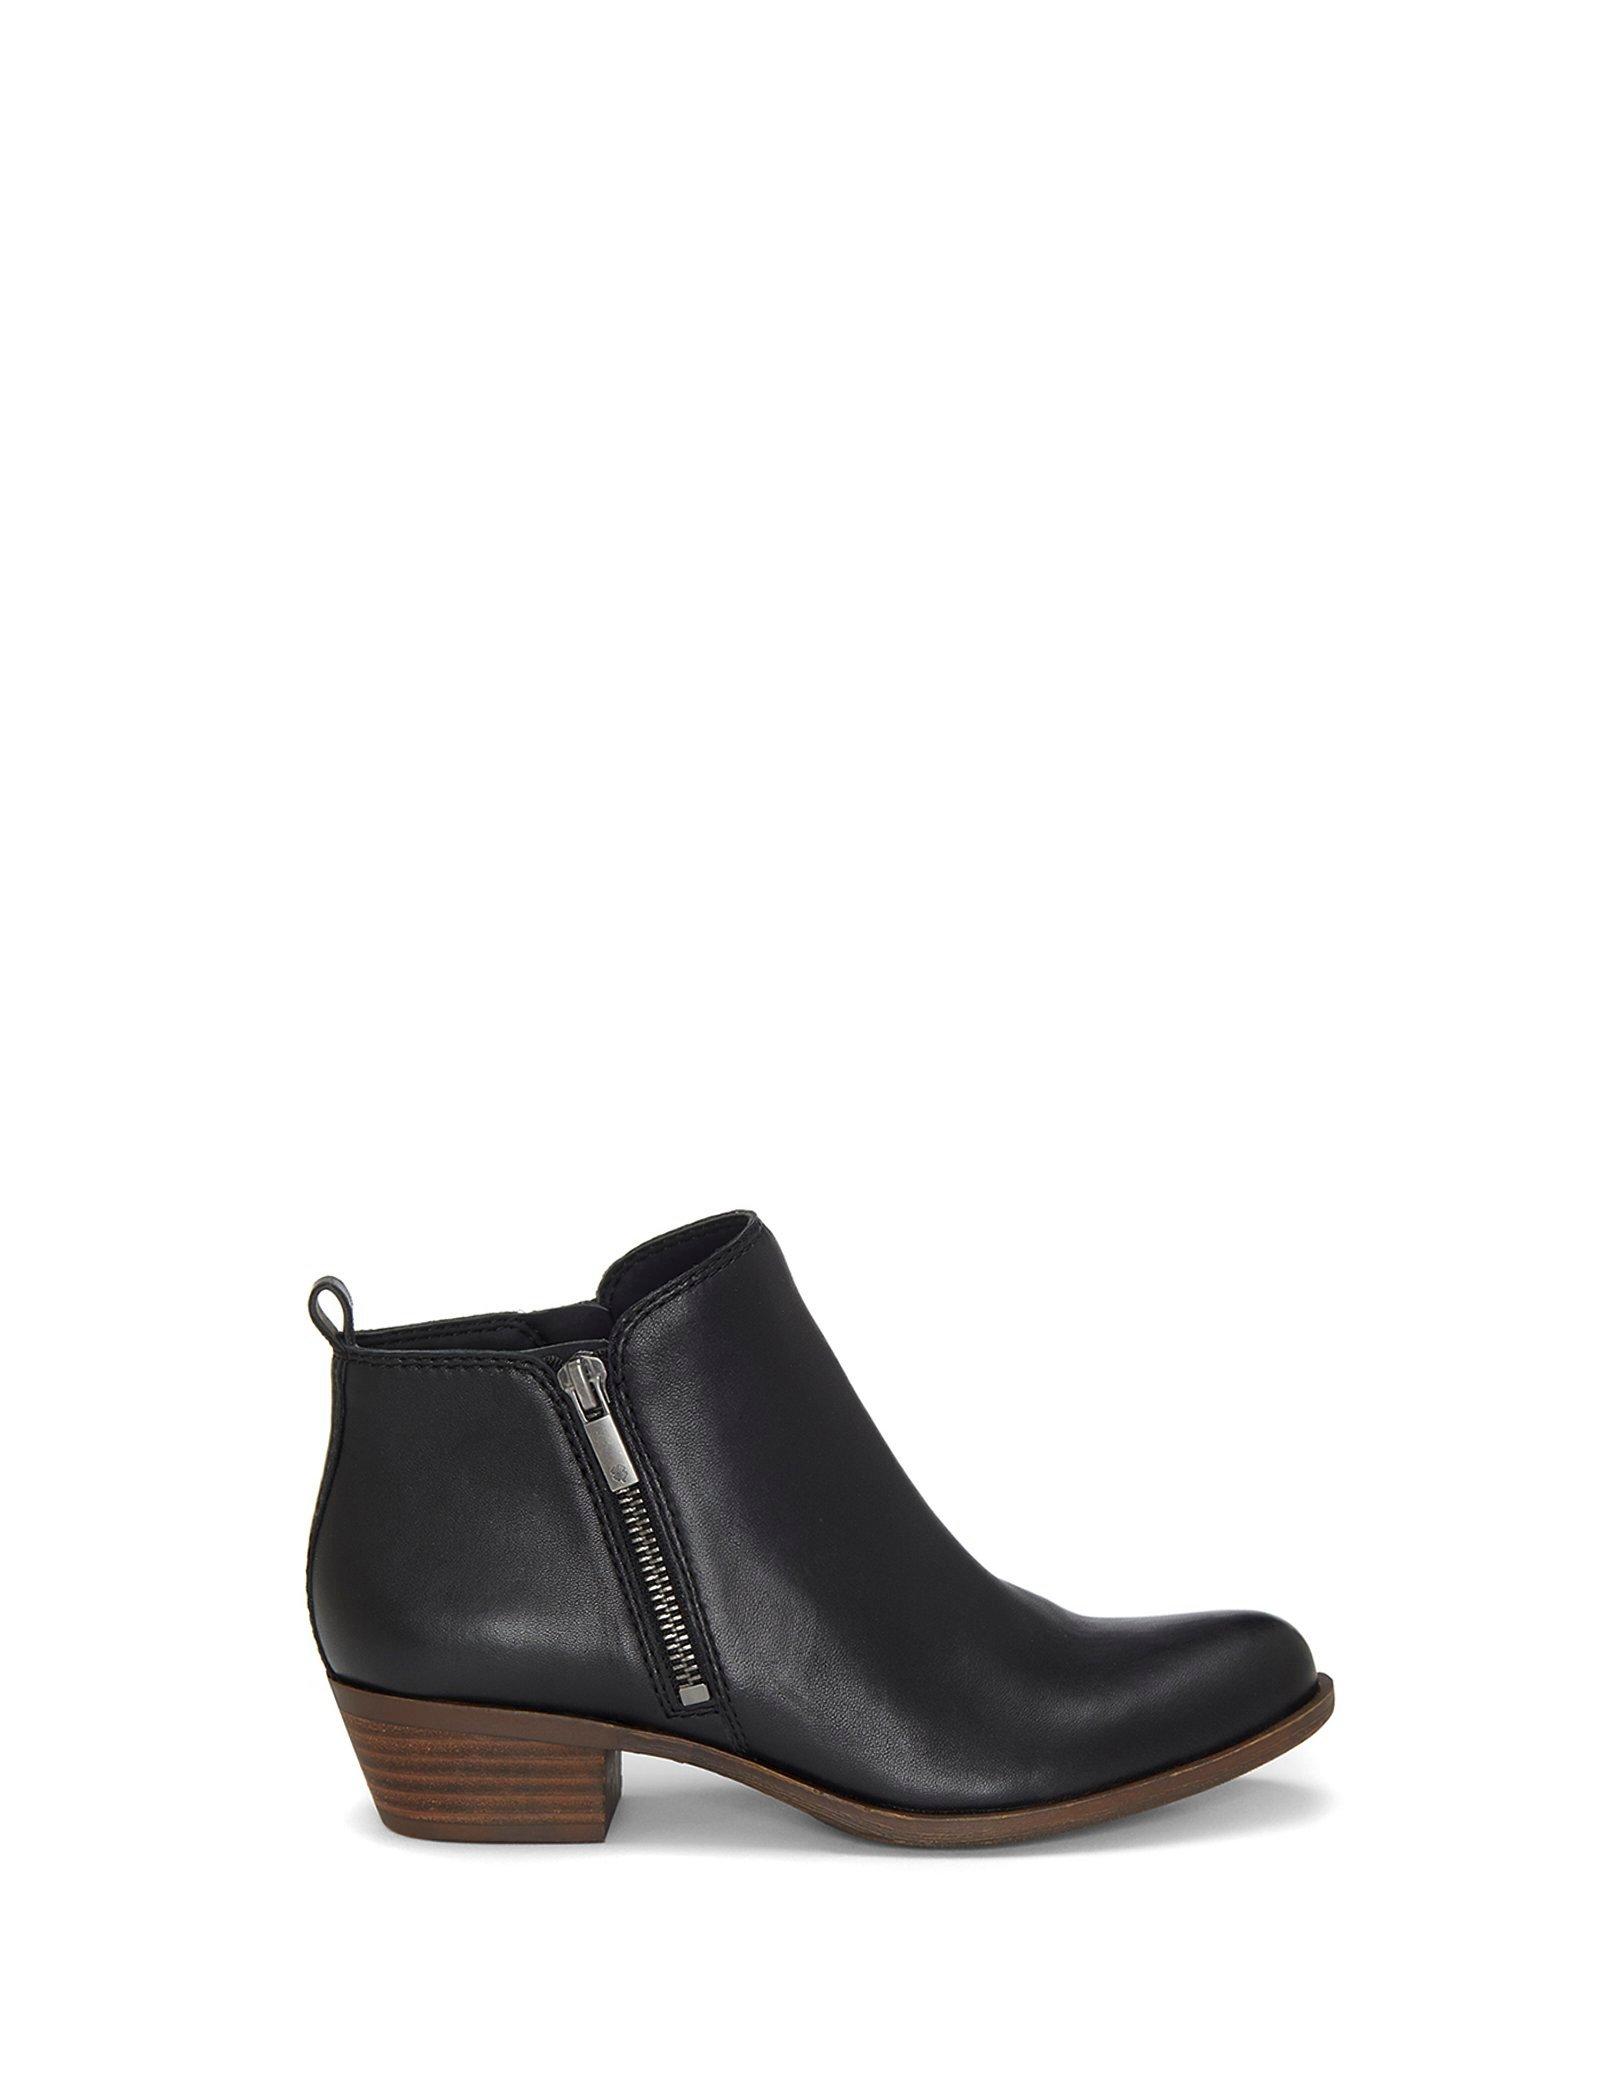 BASEL LEATHER FLAT BOOTIE, image 7